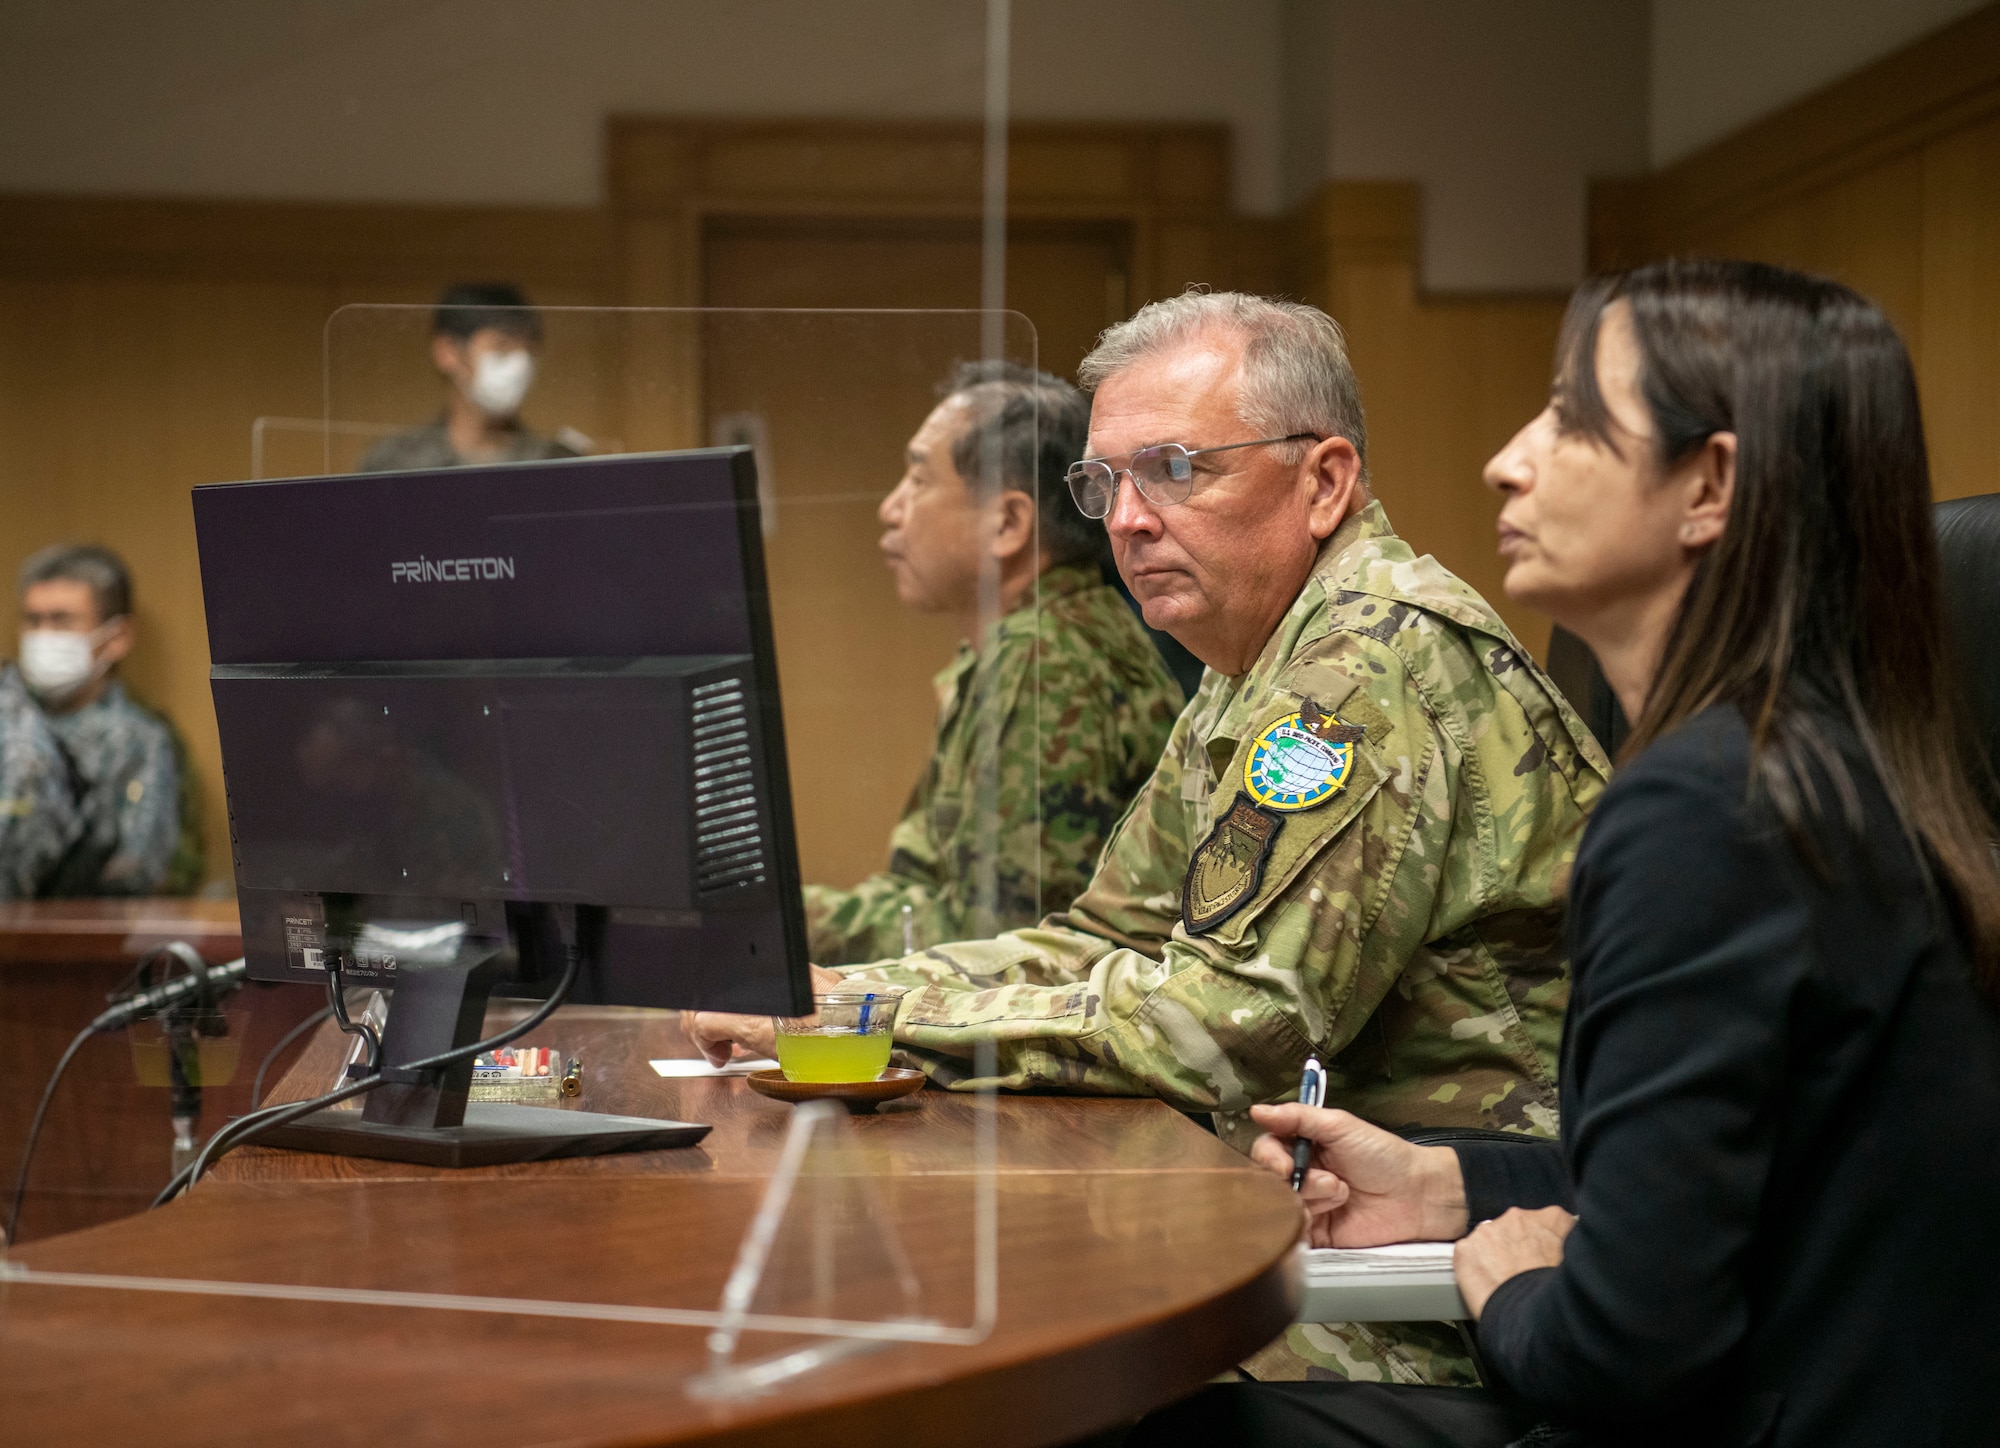 U.S. Air Force Lt. Gen. Ricky Rupp, commander of United States Forces Japan and Fifth Air Force, receives a Space Operations Center brief during exercise Keen Sword 23 at Fuchu Air Base, Japan, Nov. 17, 2022.